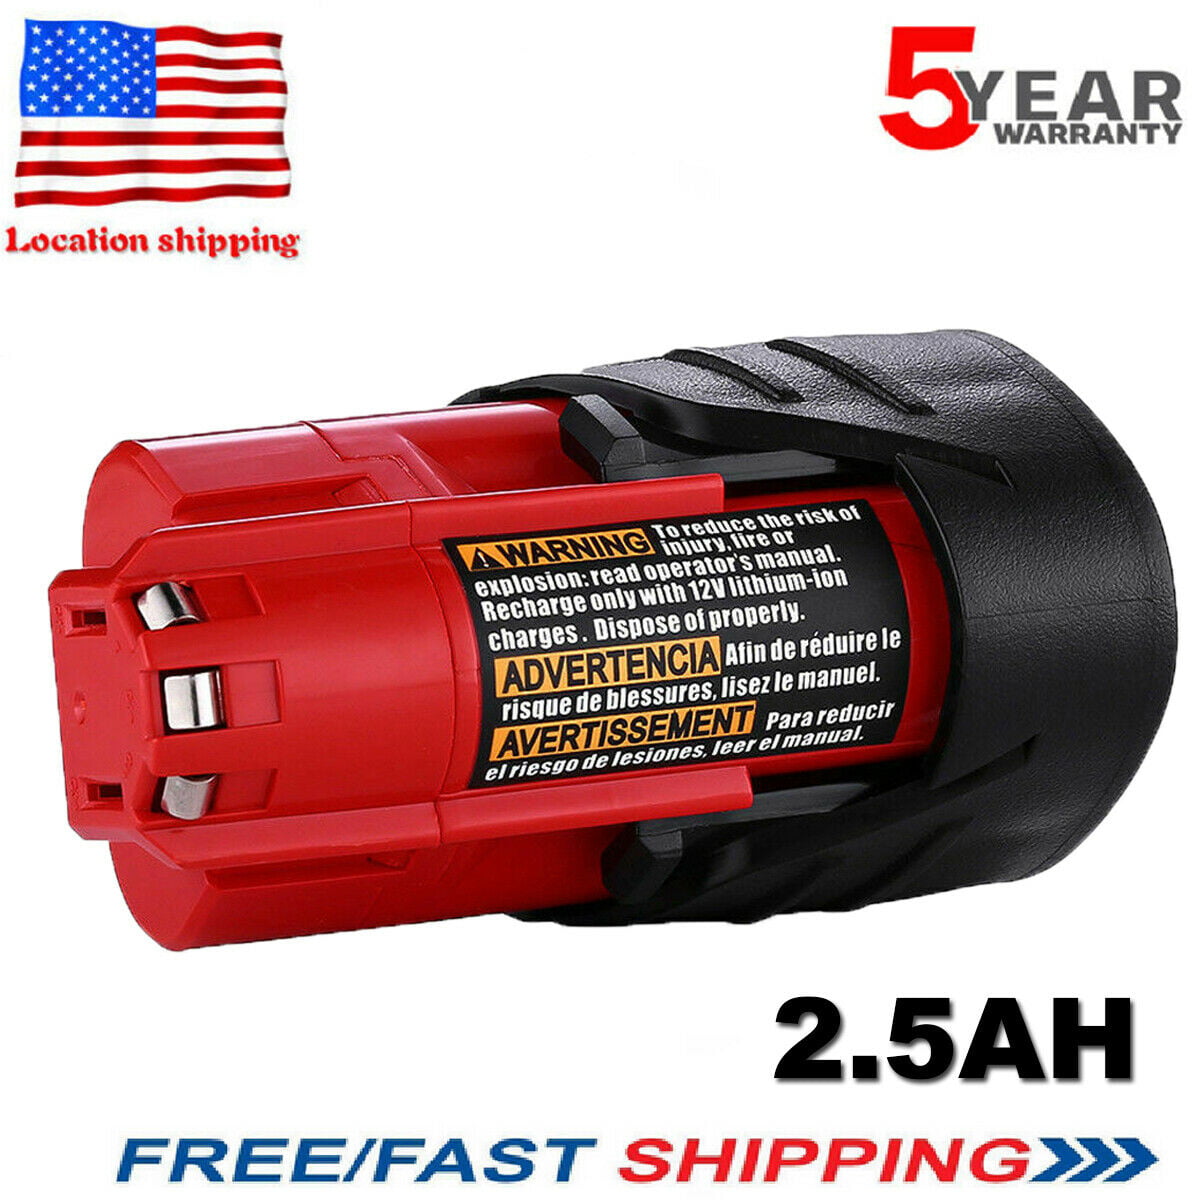 （Qty 2 ）For Milwaukee M12 12V 3.0Ah Li-Ion Extended Capacity Battery  48-11-2420